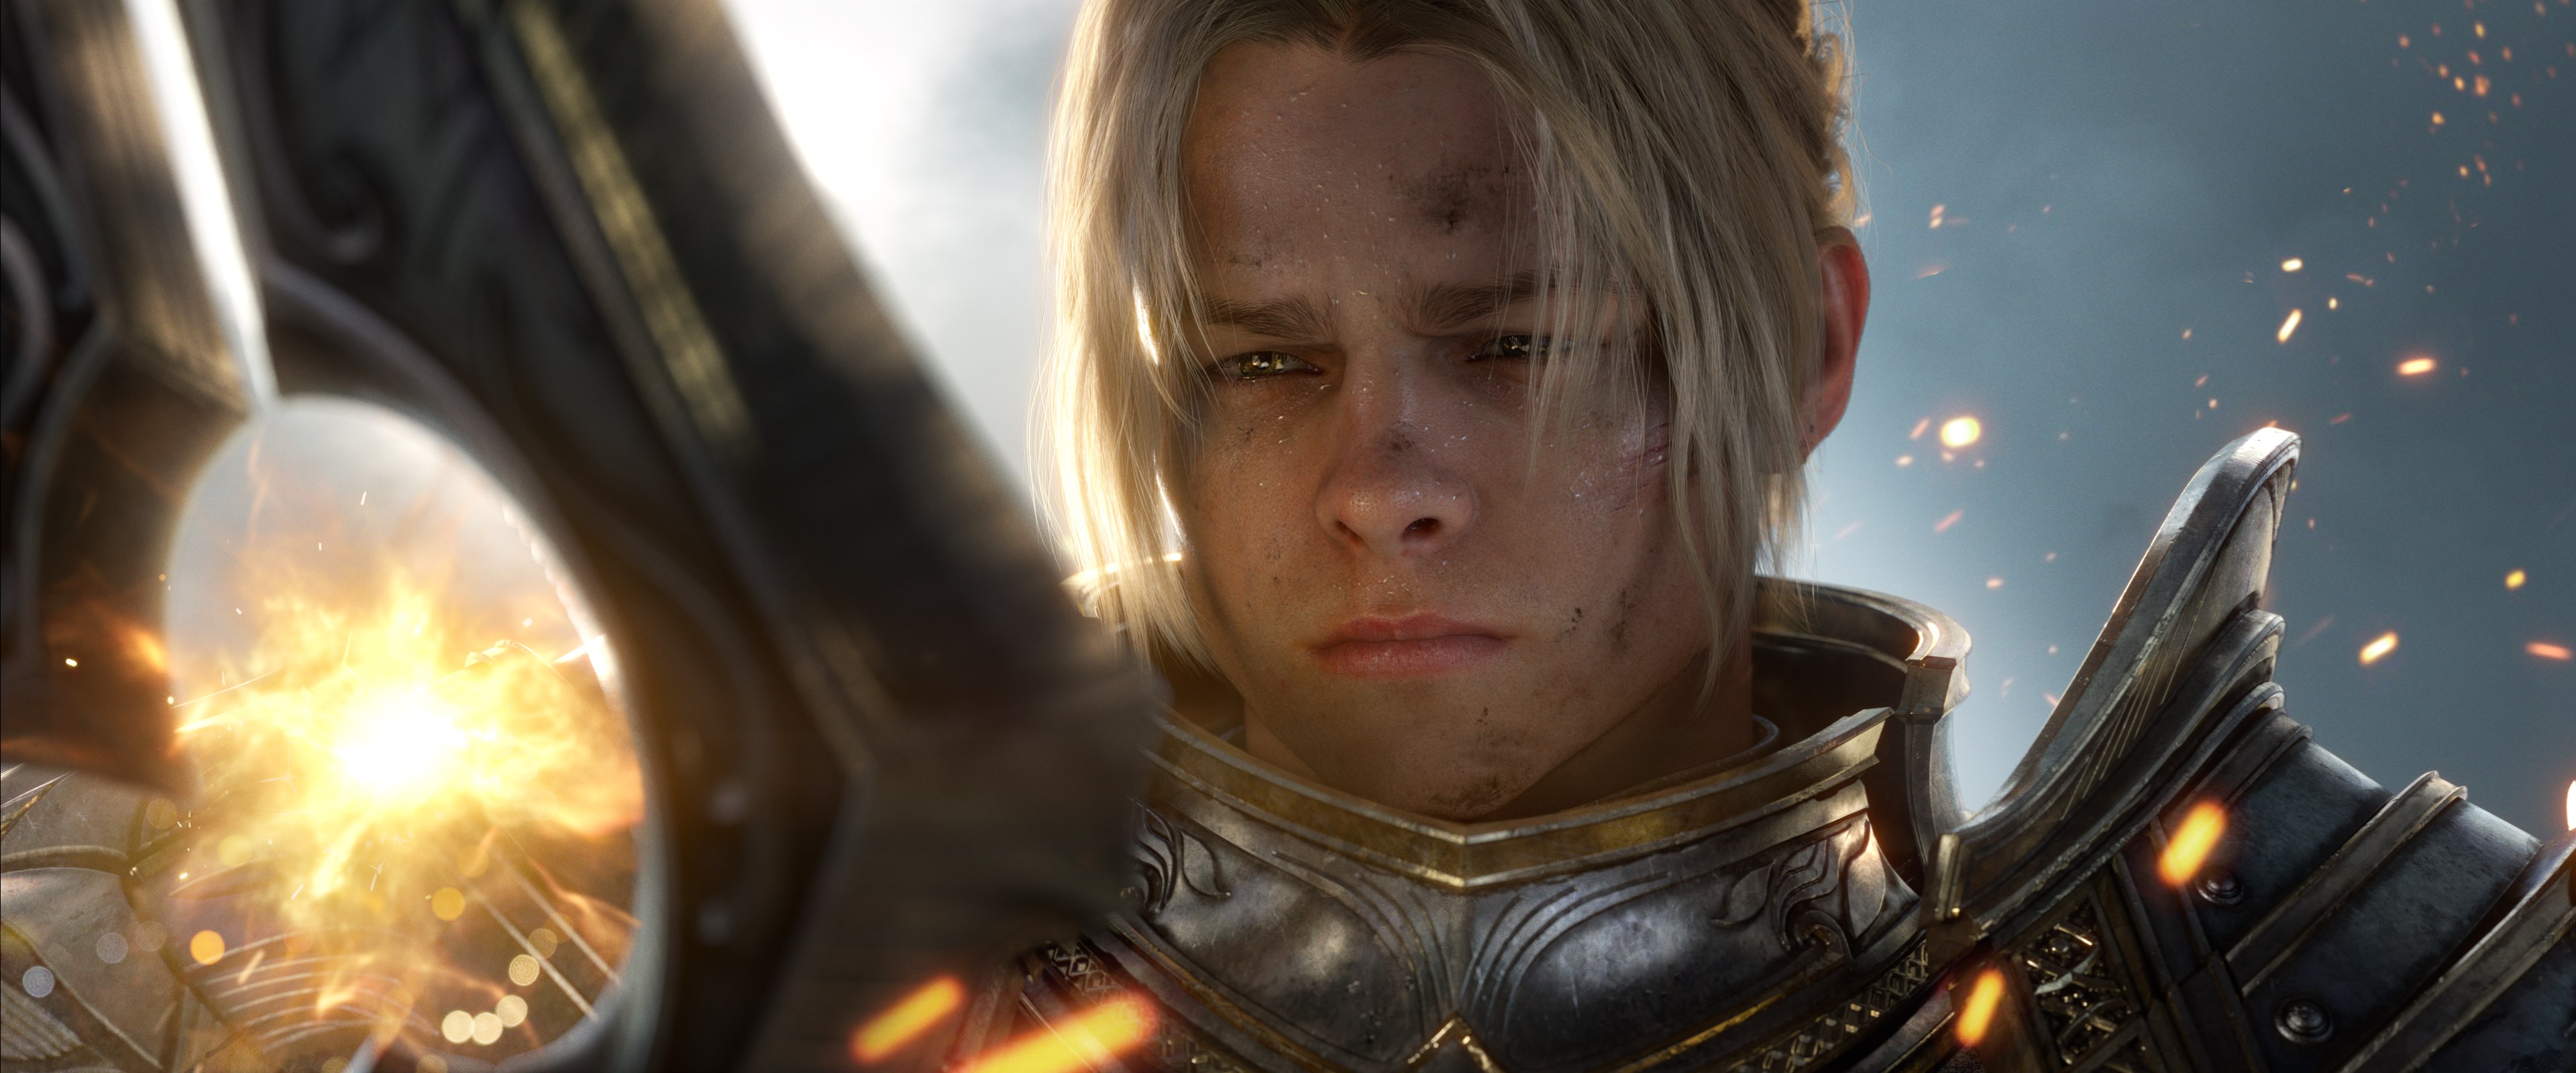 Anduin Wrynn Video Games World Of Warcraft World Of Warcraft Battle For Azeroth 3840x1600